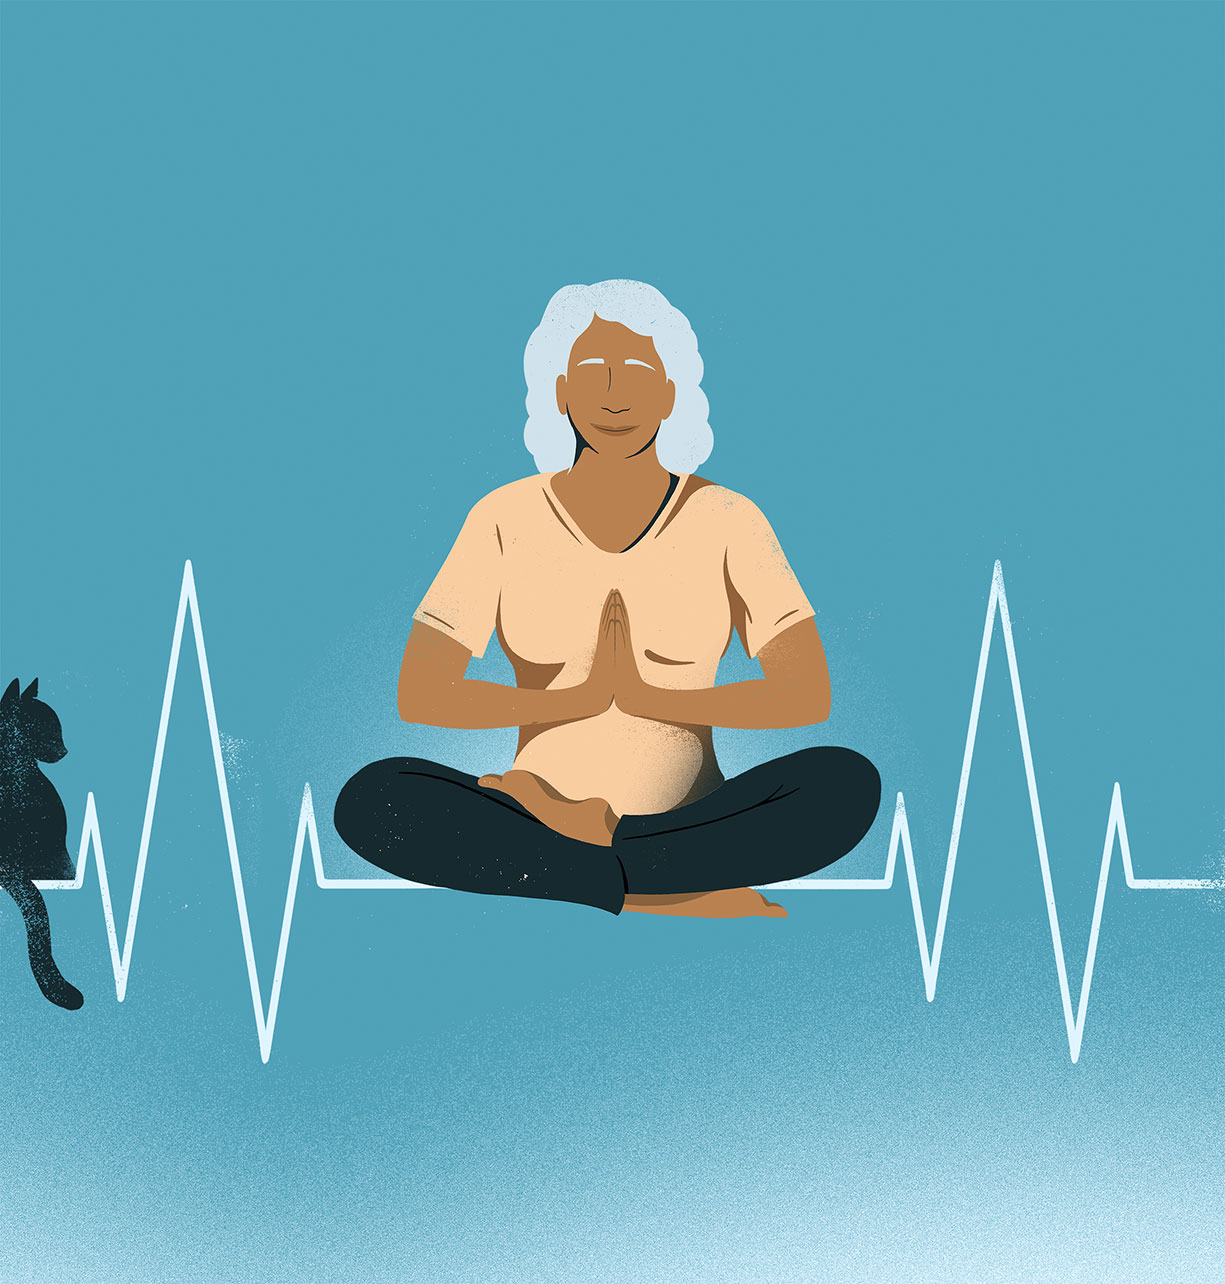 Illustration of a woman meditating with an EKG symbol behind her on a blue background